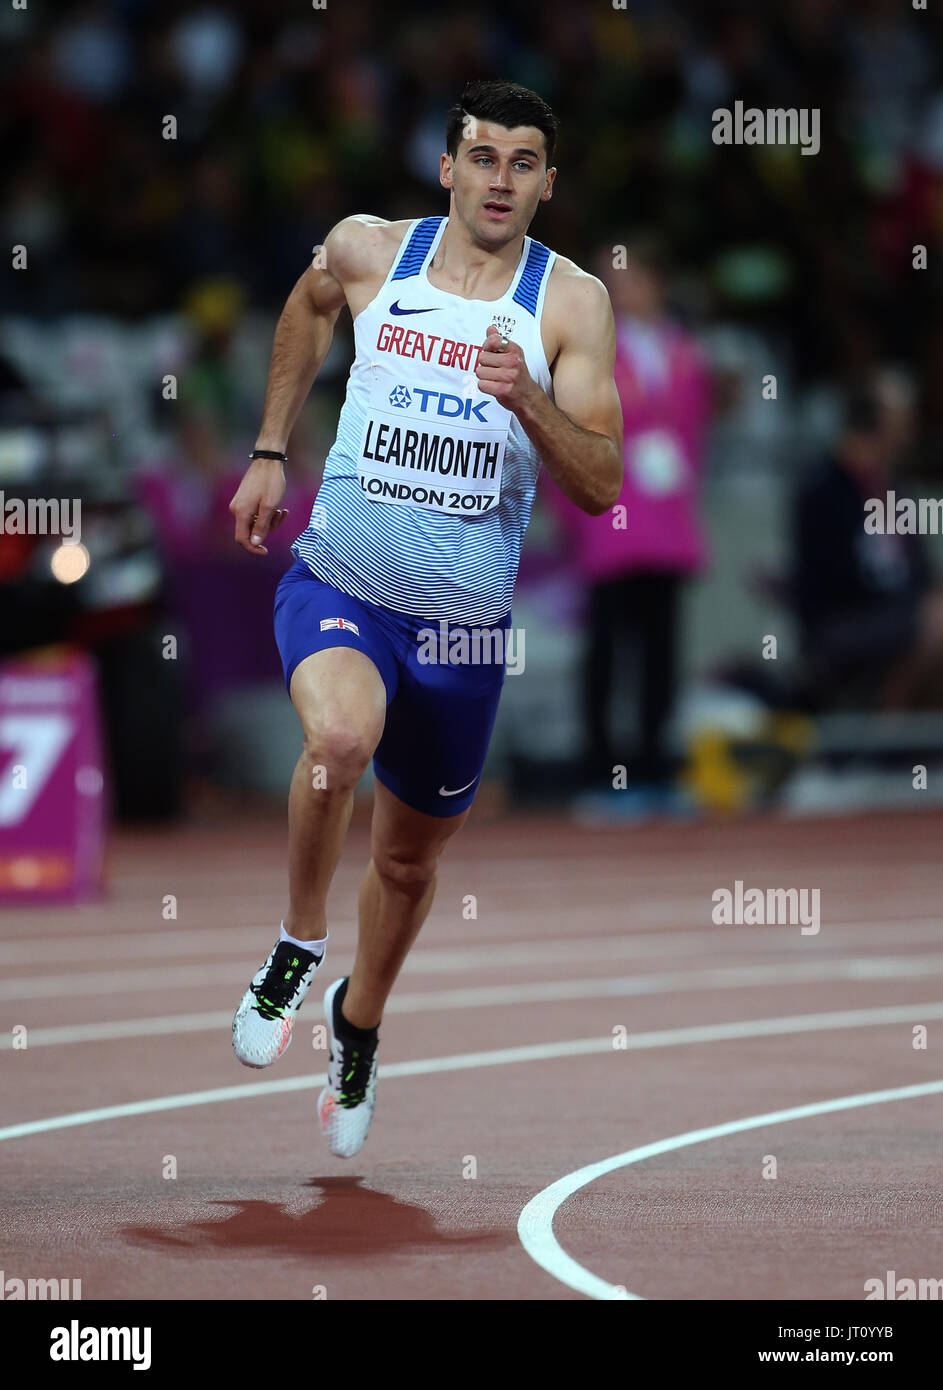 Guy Learmonth 800 Metres World Athletics Championships 2017 London Stam, London, England 06 August 2017 Credit: Allstar Picture Library/Alamy Live News Stock Photo